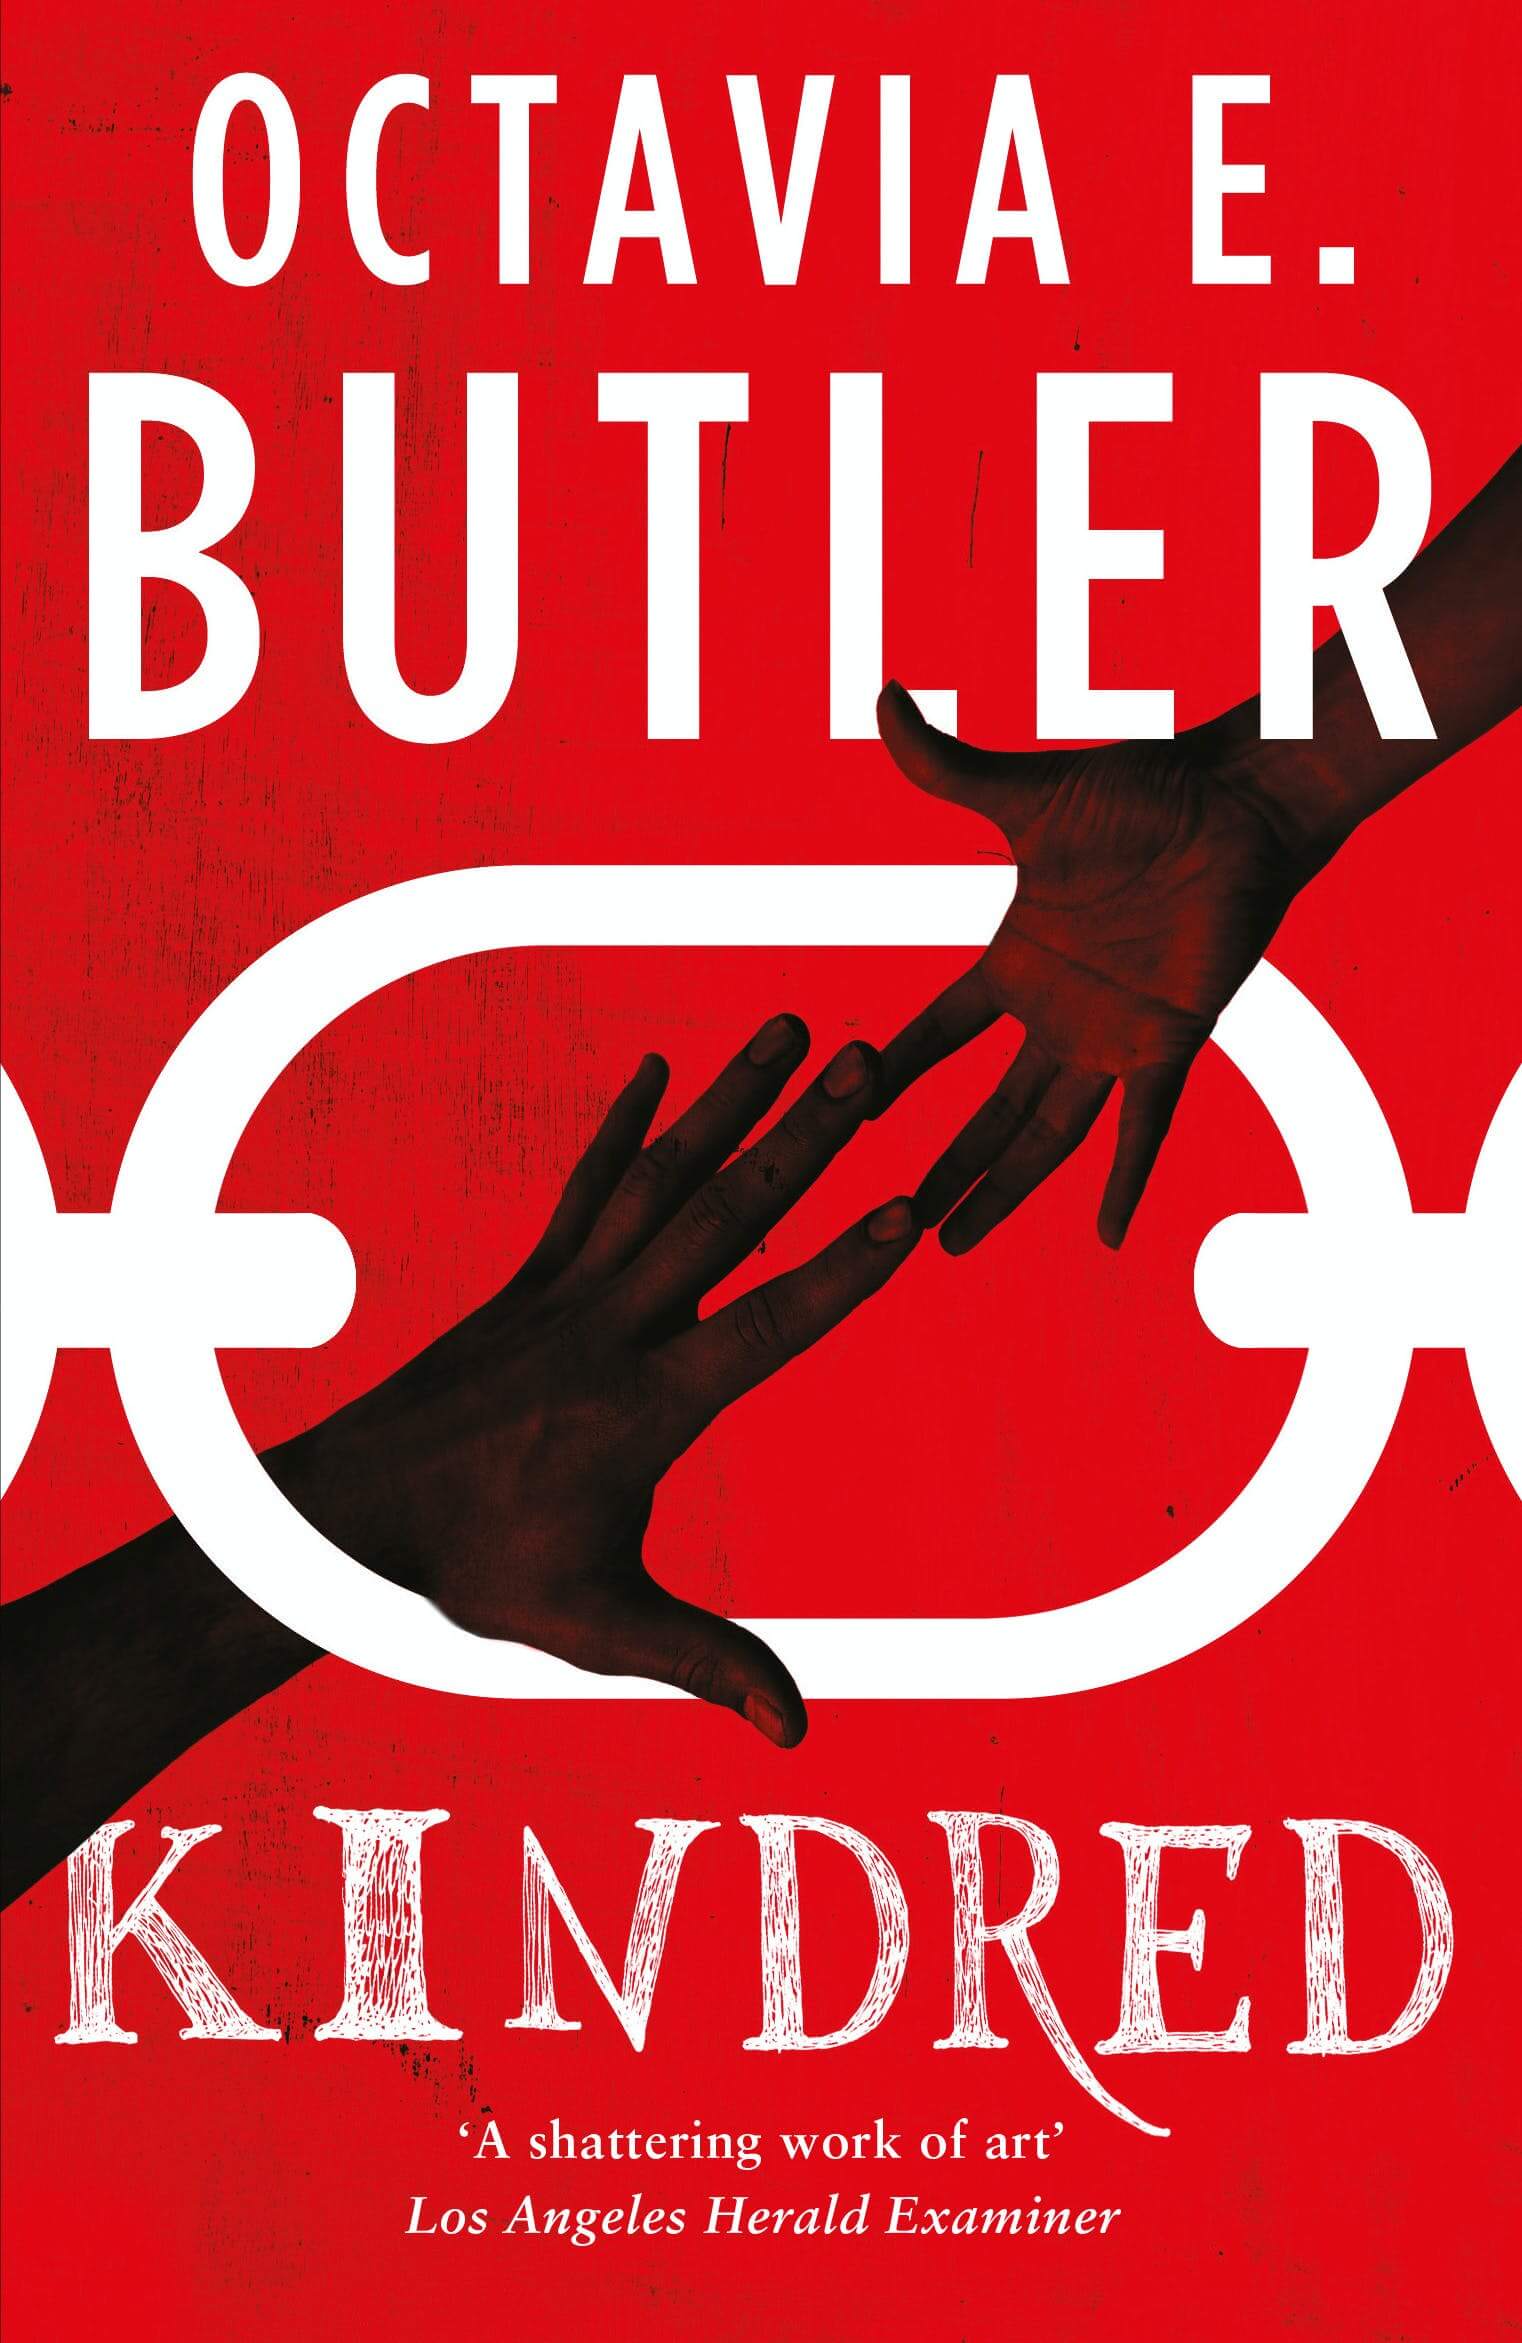 Cover of Kindred by Octavia E. Butler 